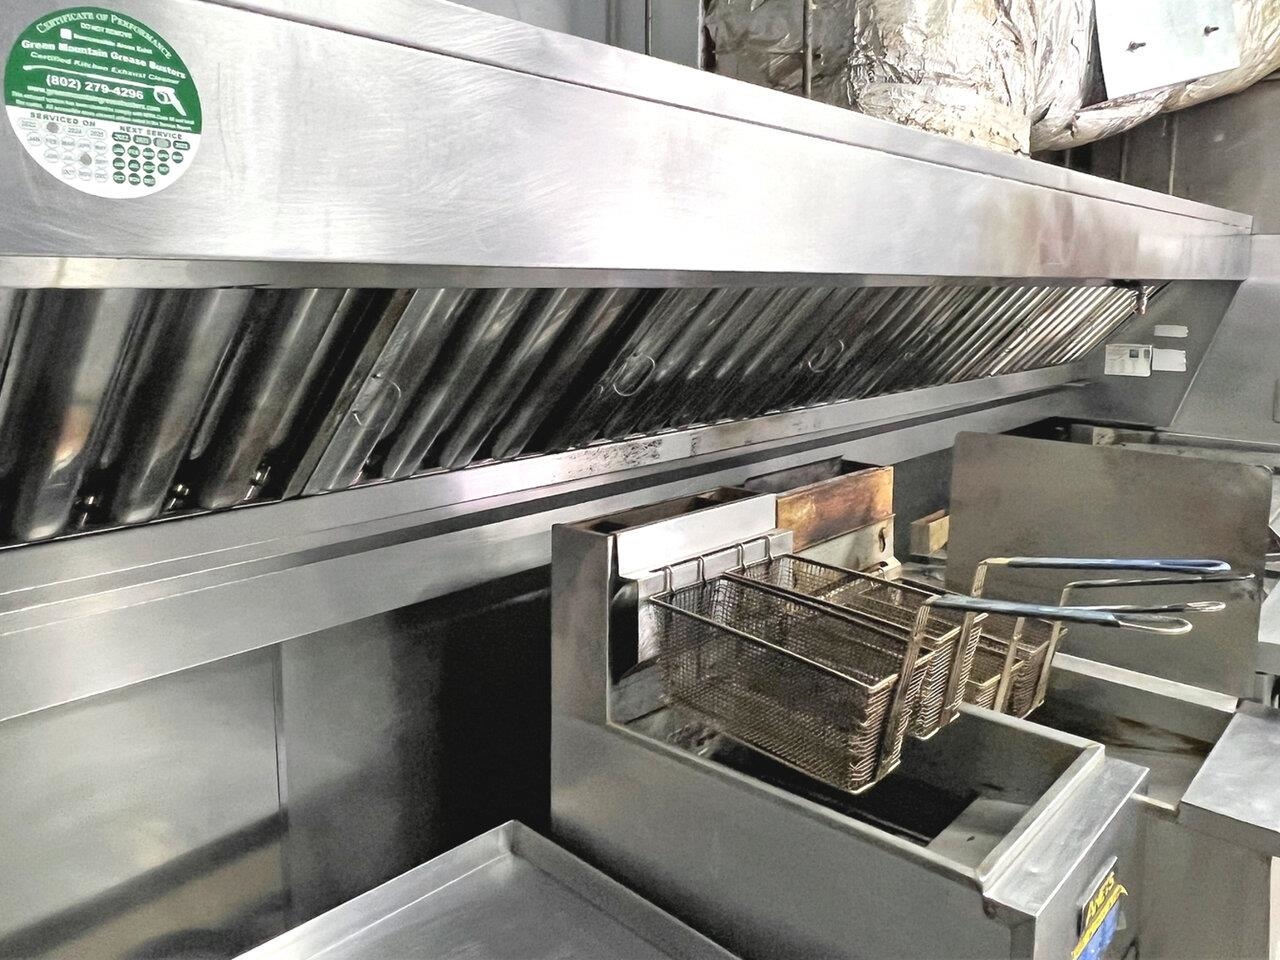 Pitco commercial fryer